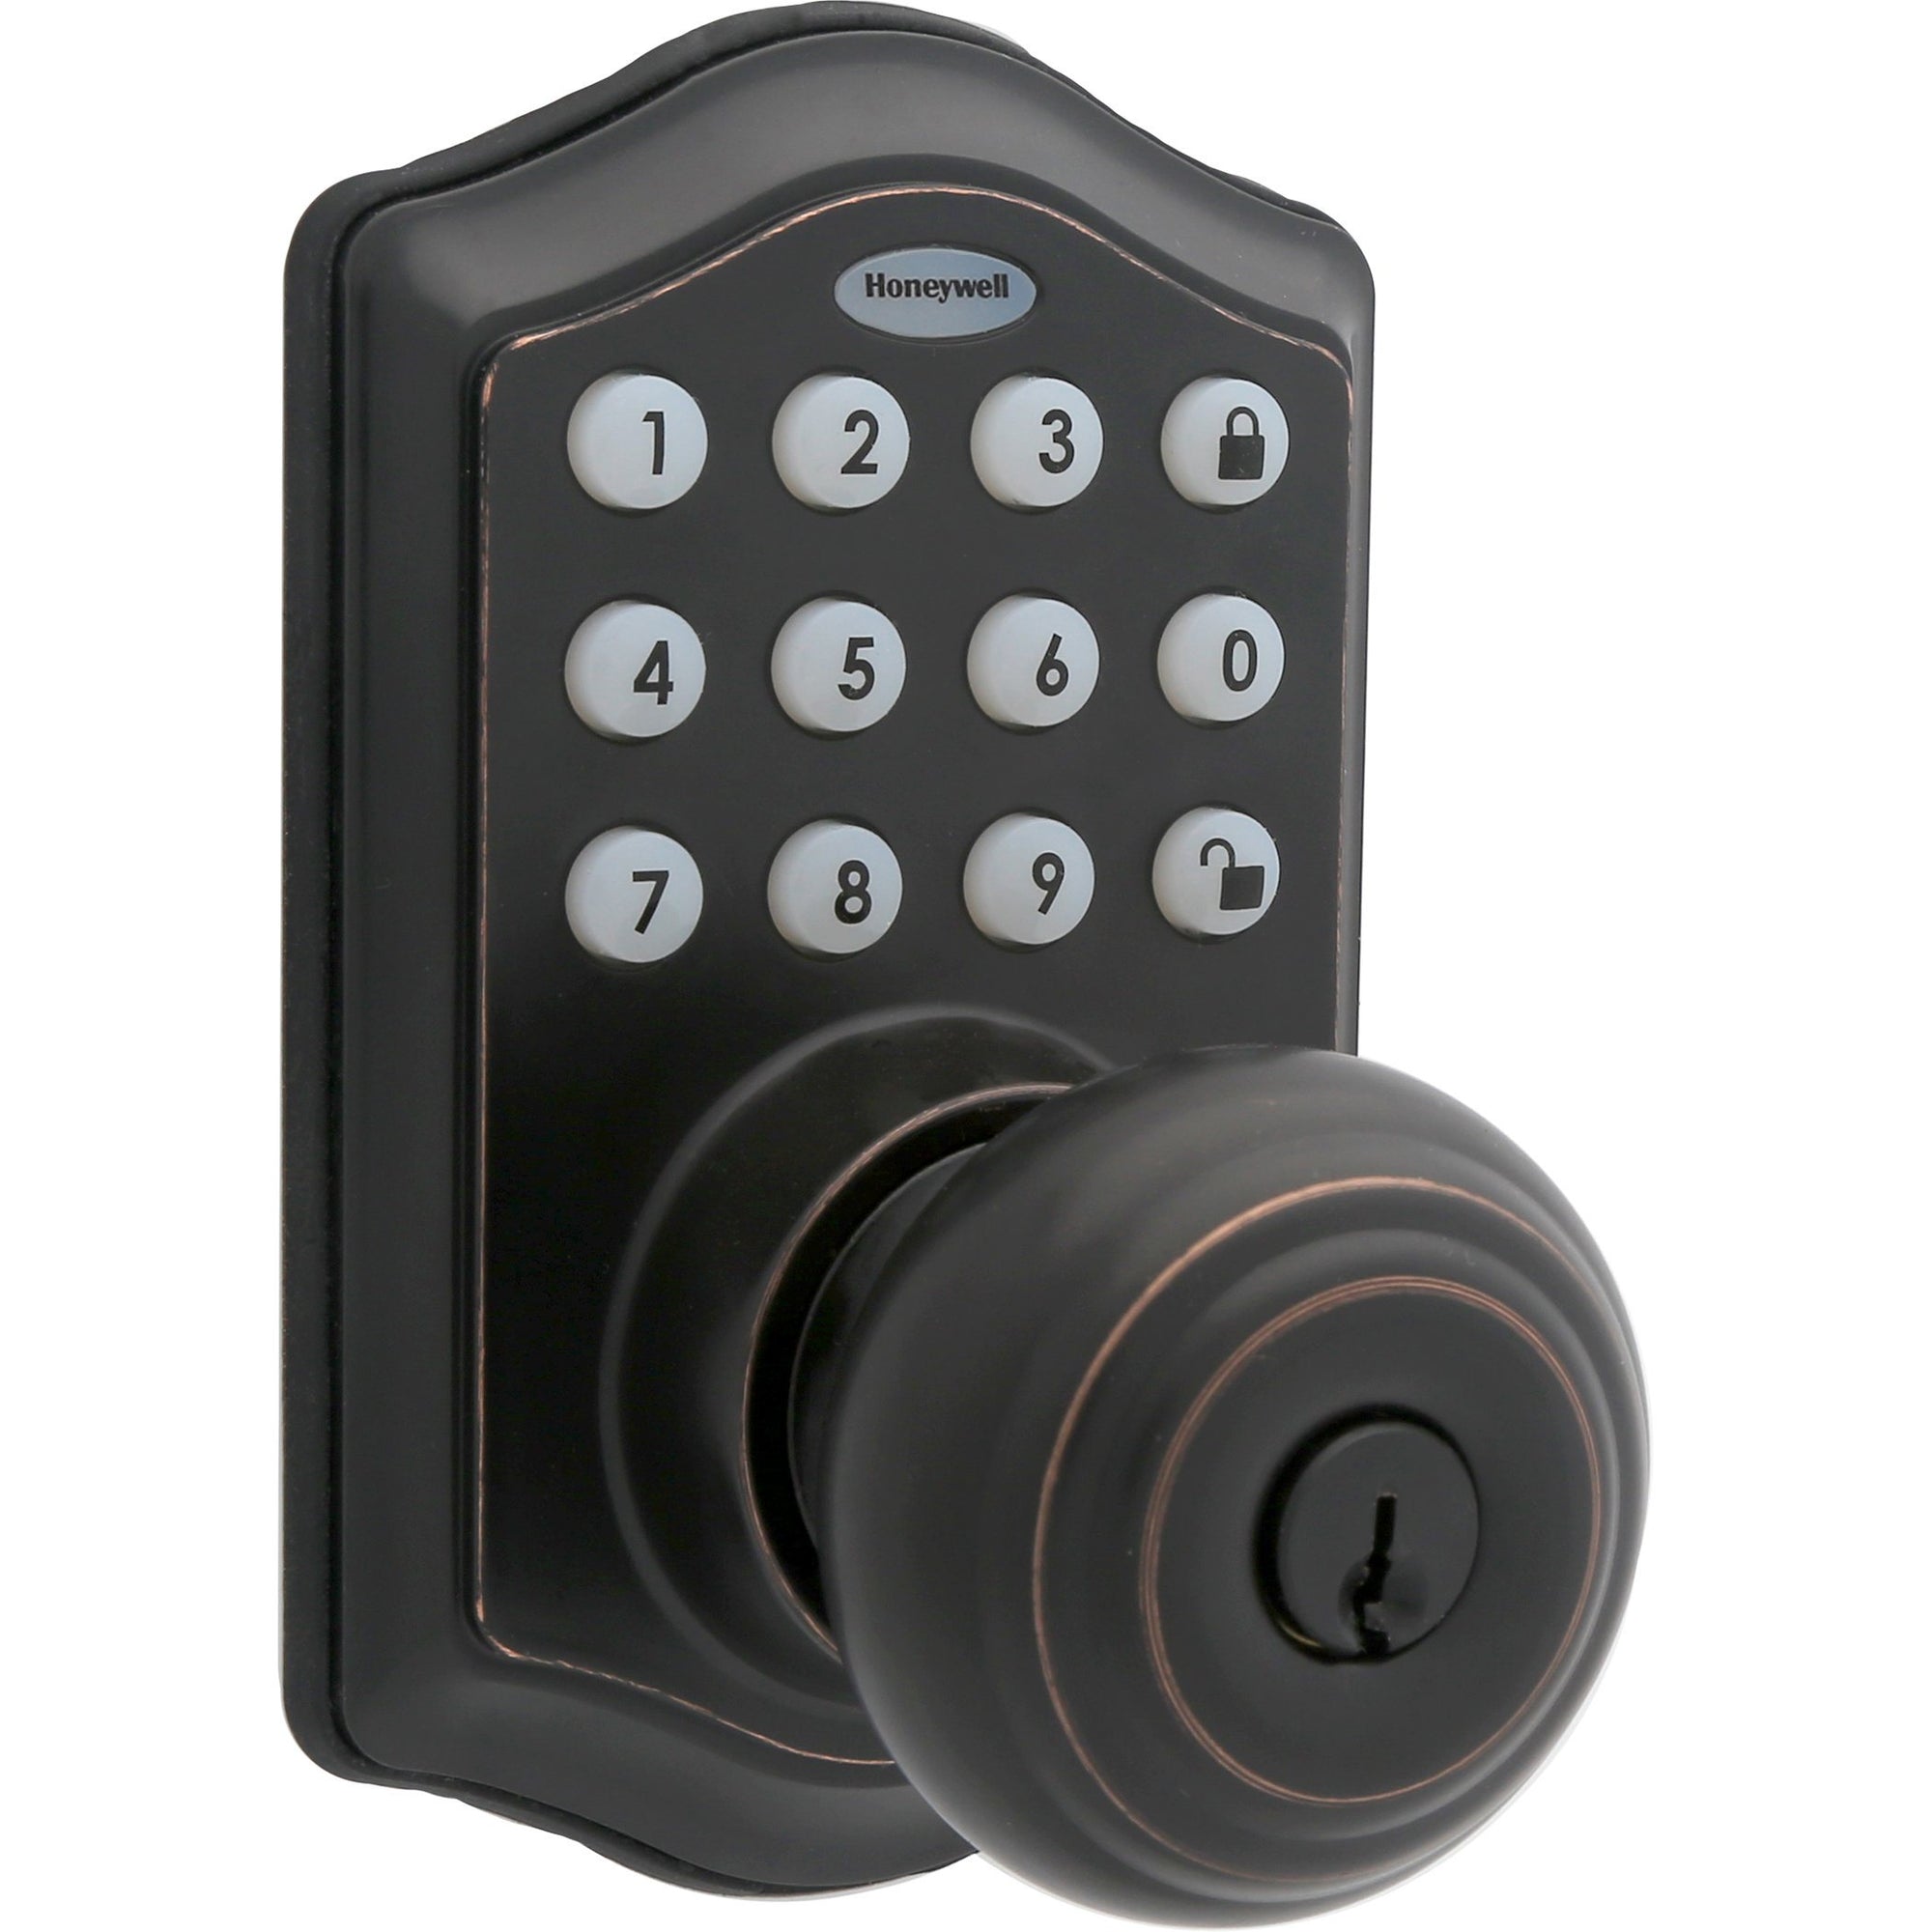 Honeywell 8732401 Electronic Entry Knob Door Lock with Keypad Oil Rubbed Bronze